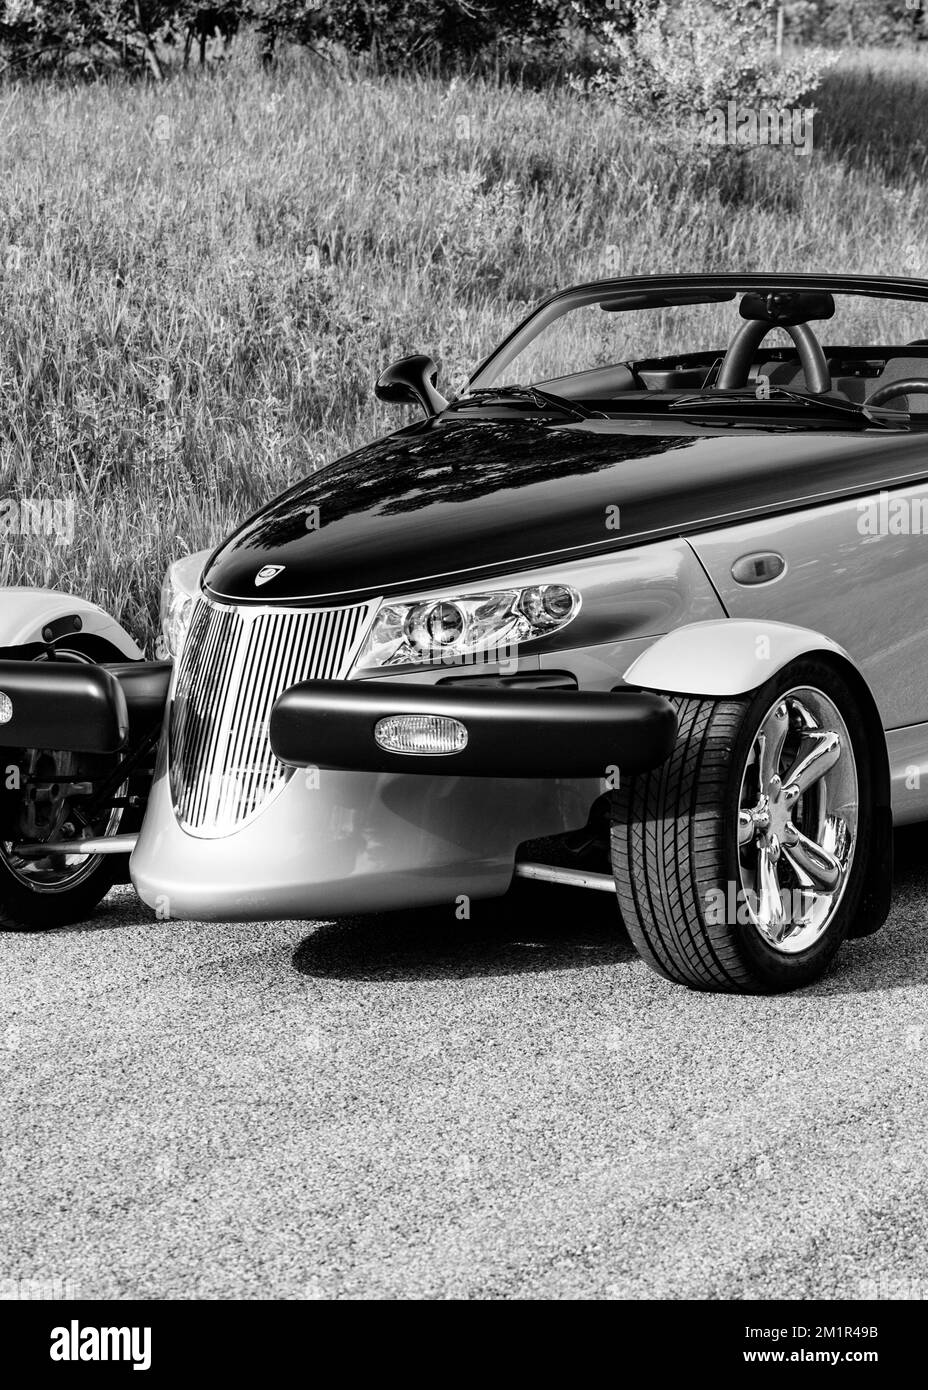 2001 Plymouth Prowler Black Tie Edition on Pavement Stock Photo